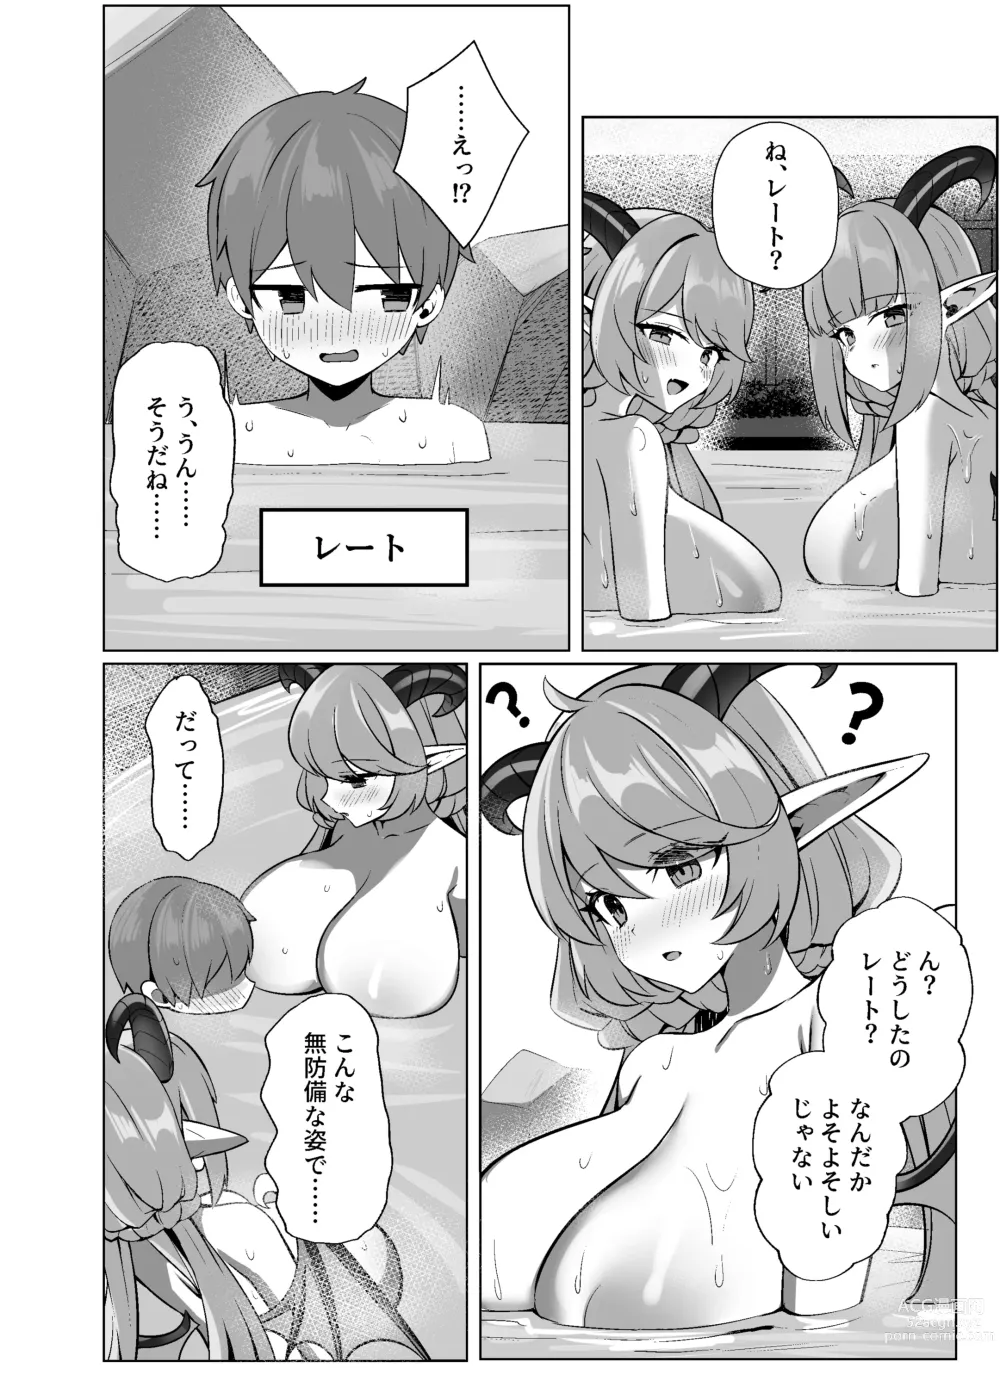 Page 34 of imageset 麻呂太